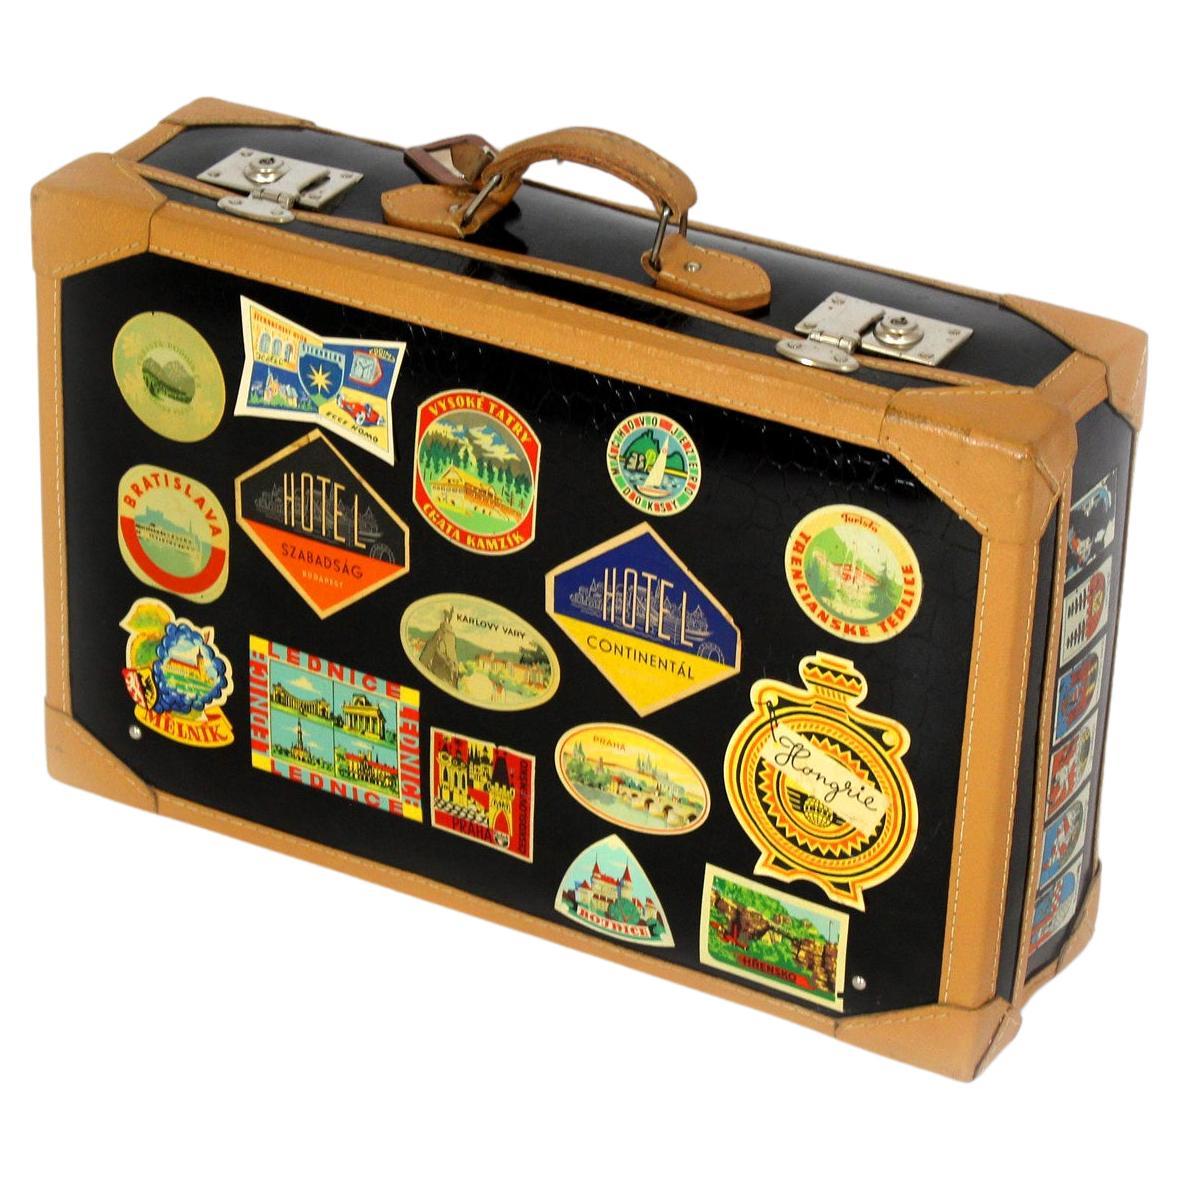 Vintage Leather Suitcase with Original Stickers, 1950s